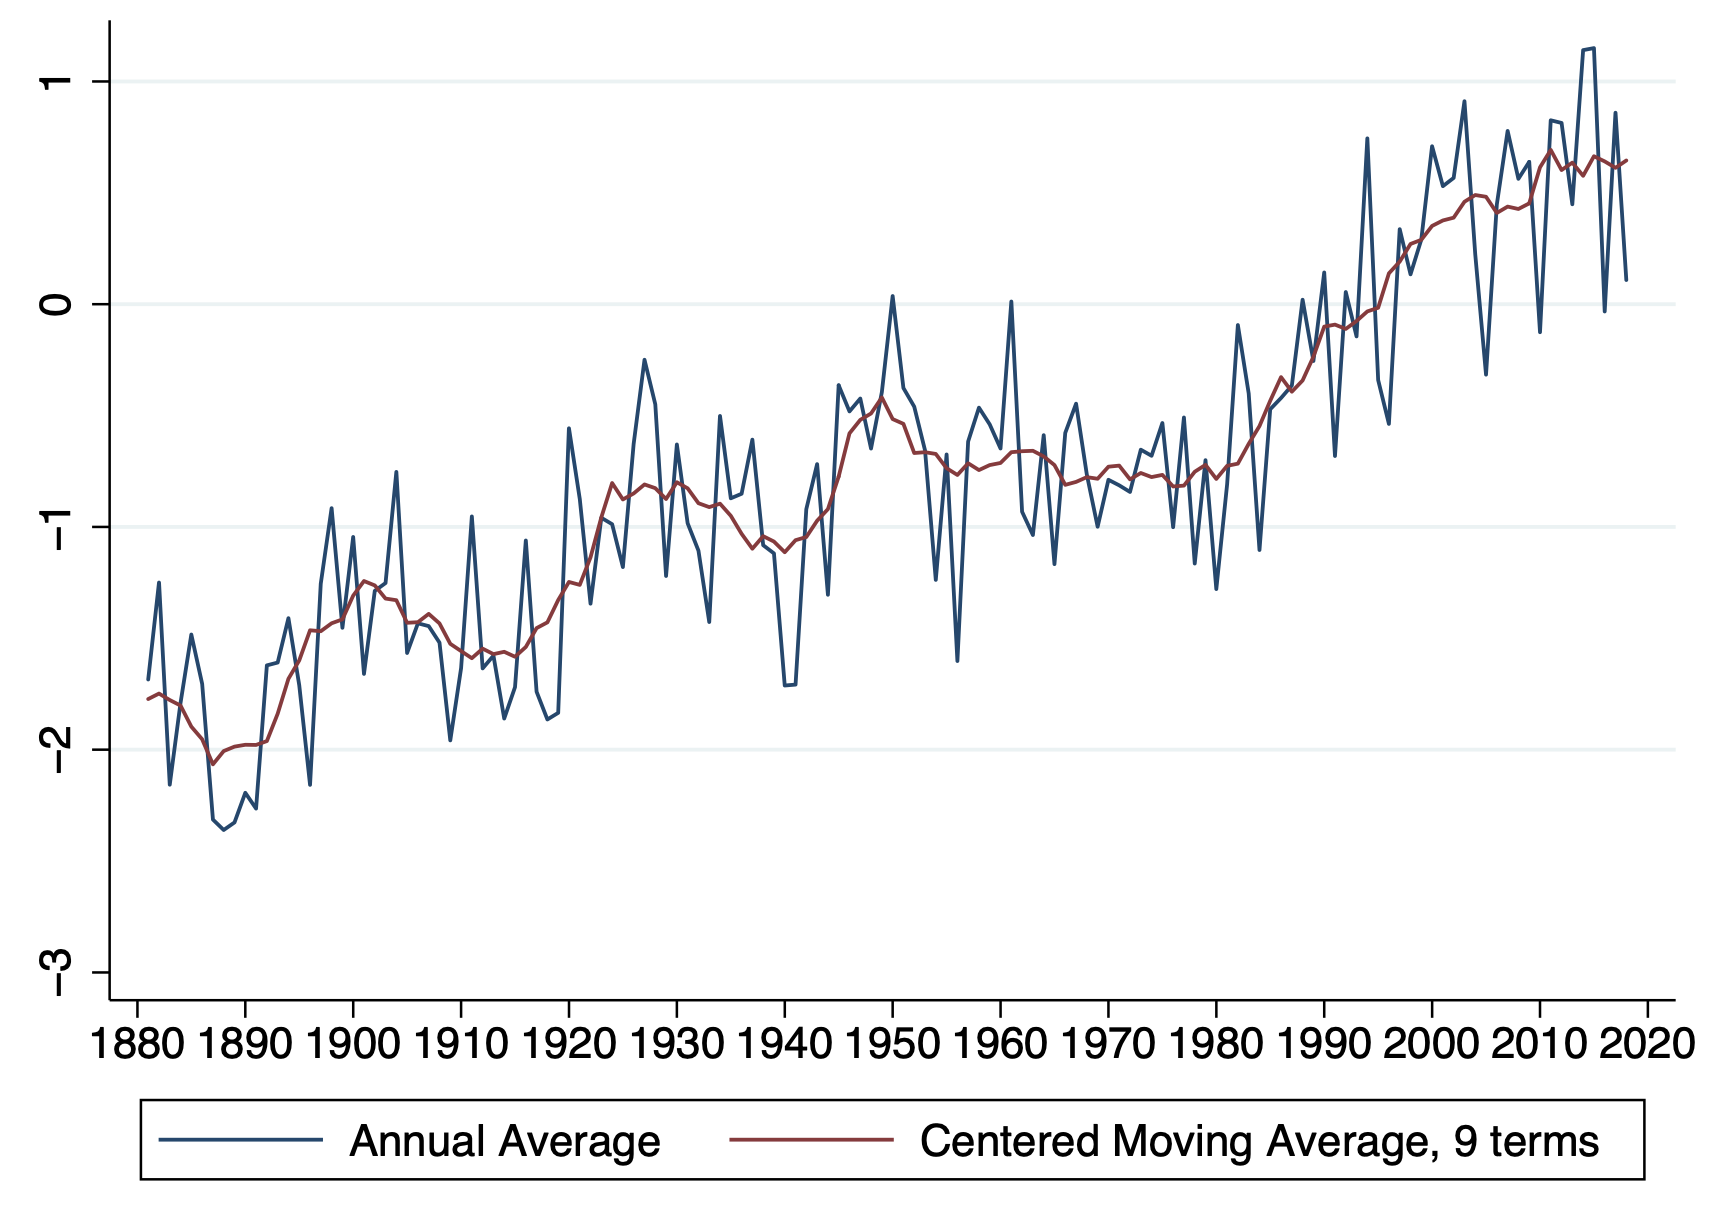 Figure 2 Temperature in deviations from the 1990-1999 average